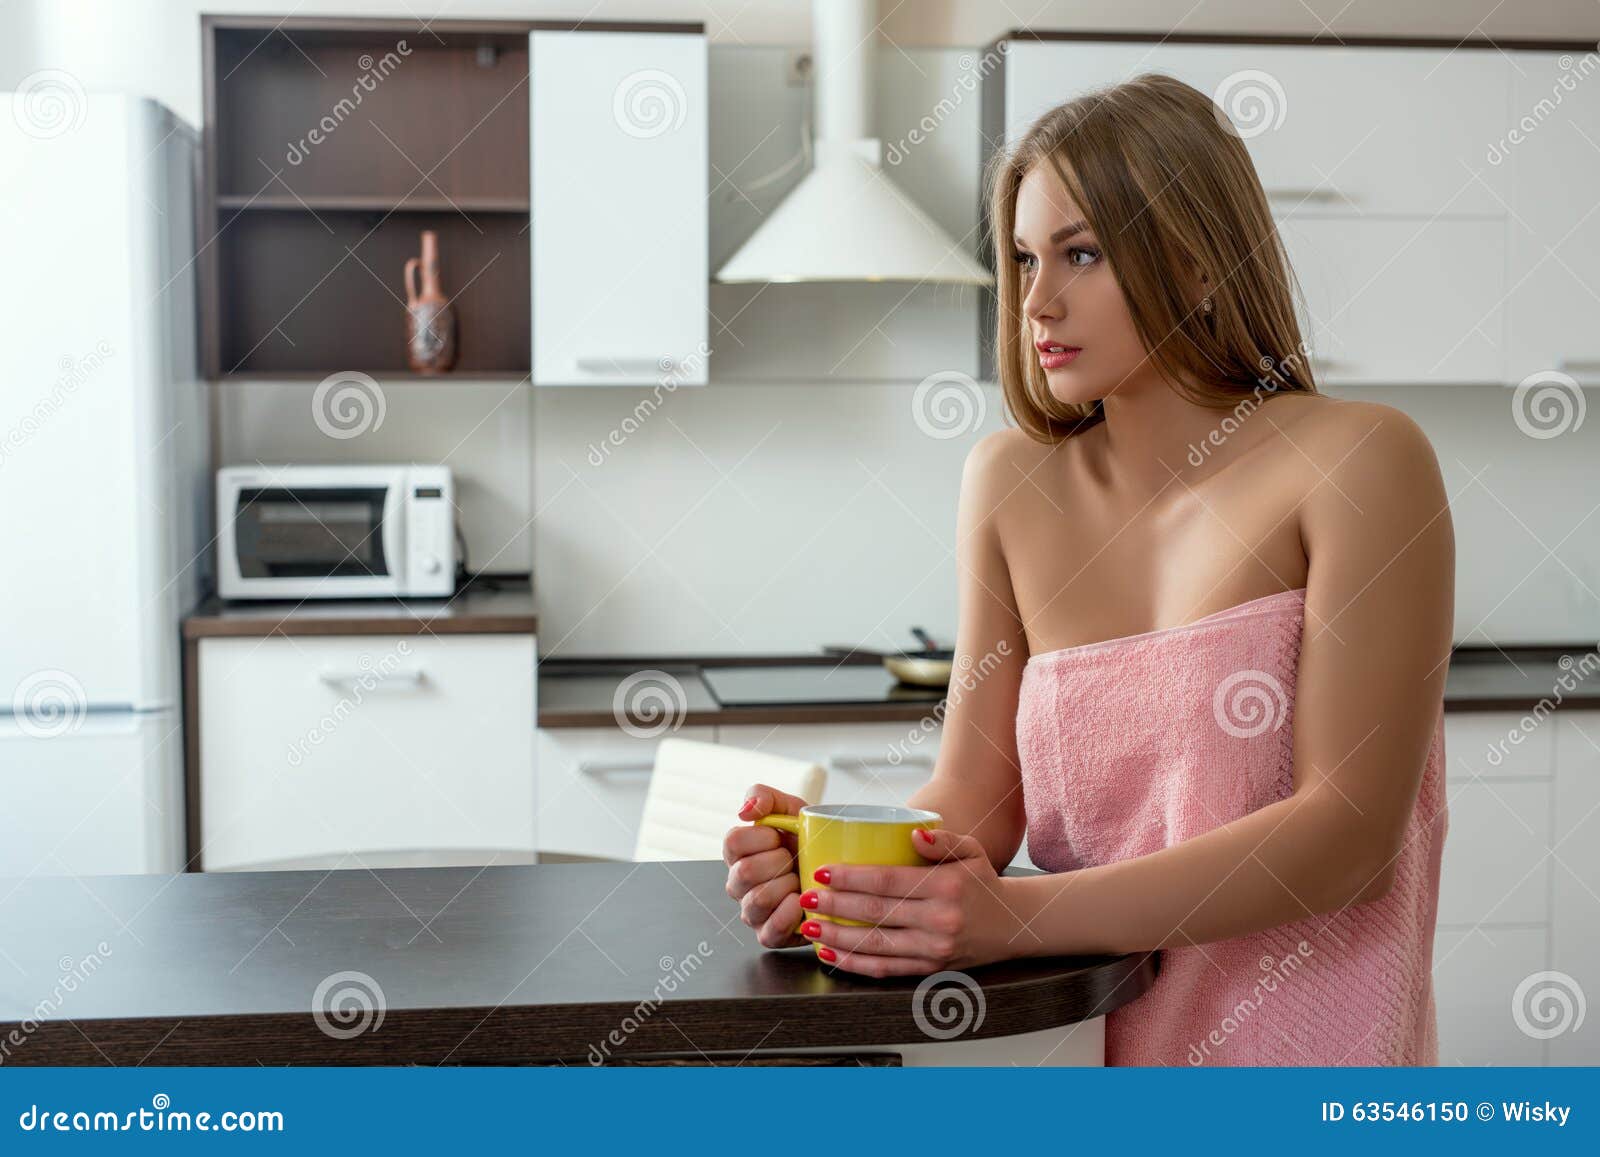 Woman With Cup Posing In Kitchen After Shower Stock Photo Image Of